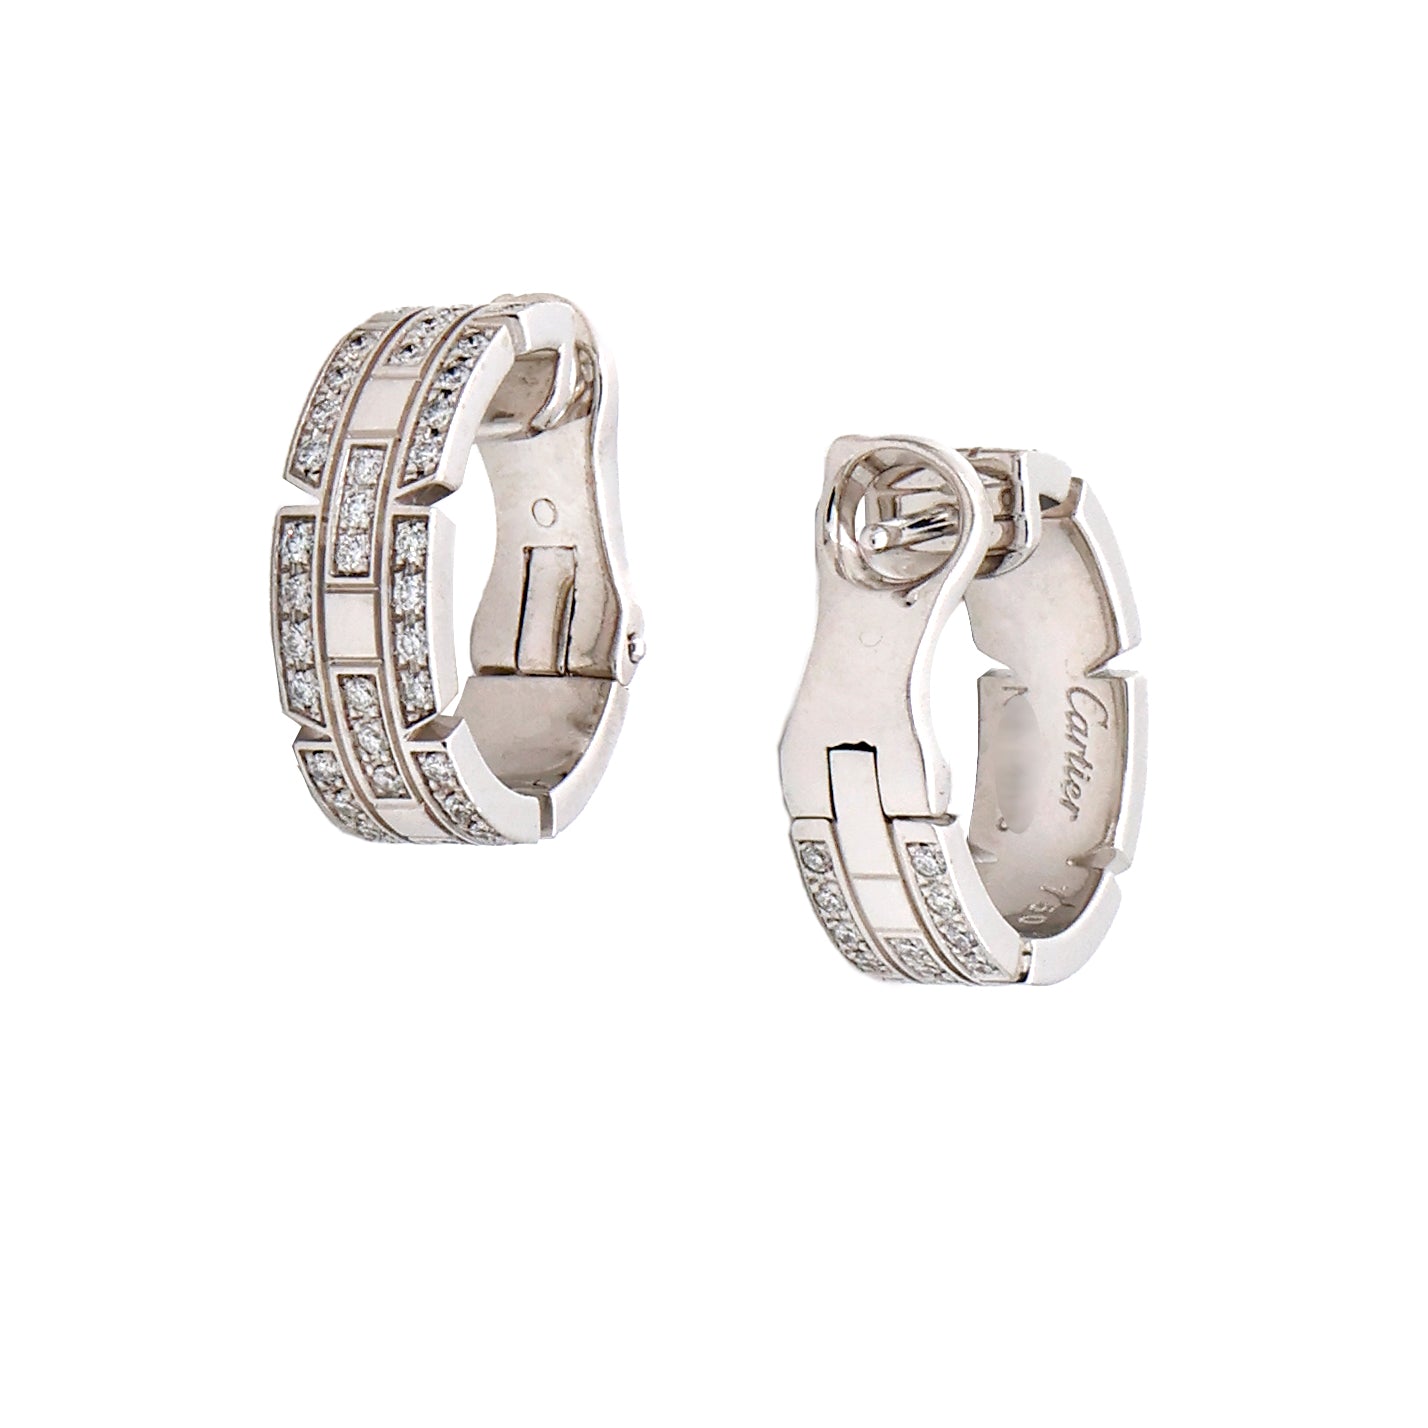 Cartier Maillon Panthere Diamond-Paved Earrings in 18k White Gold - B8032600